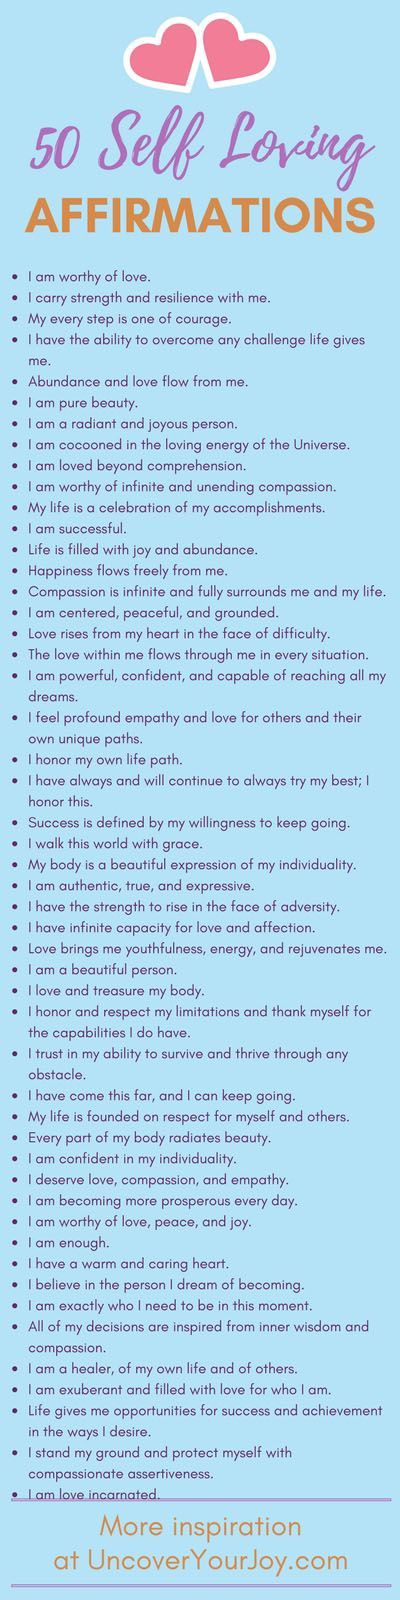 50 affirmations for self-love. Inspiring resources, quotes, and more for happiness and joy at uncoveryourjoy.com